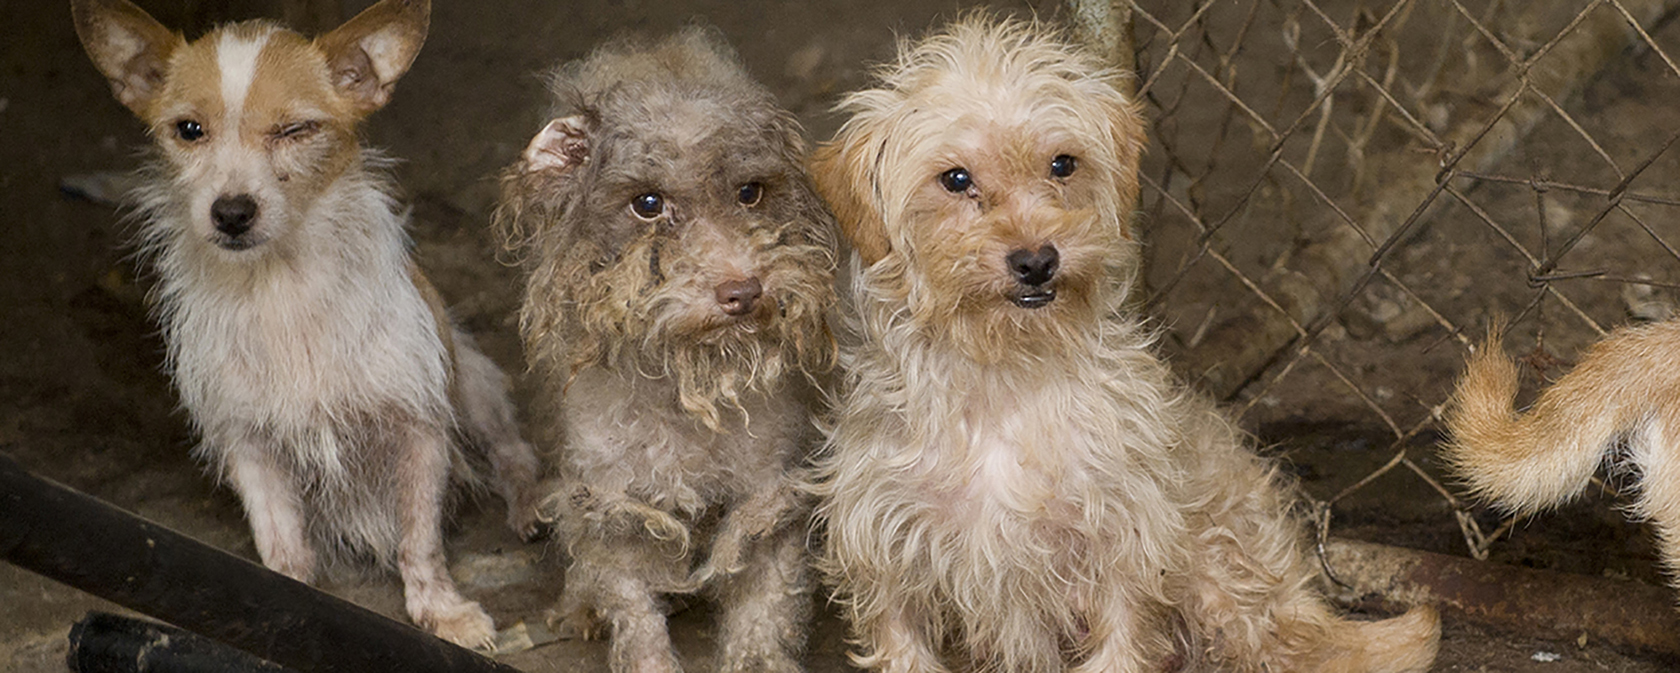 All the great progress in our fight against puppy mills this summer